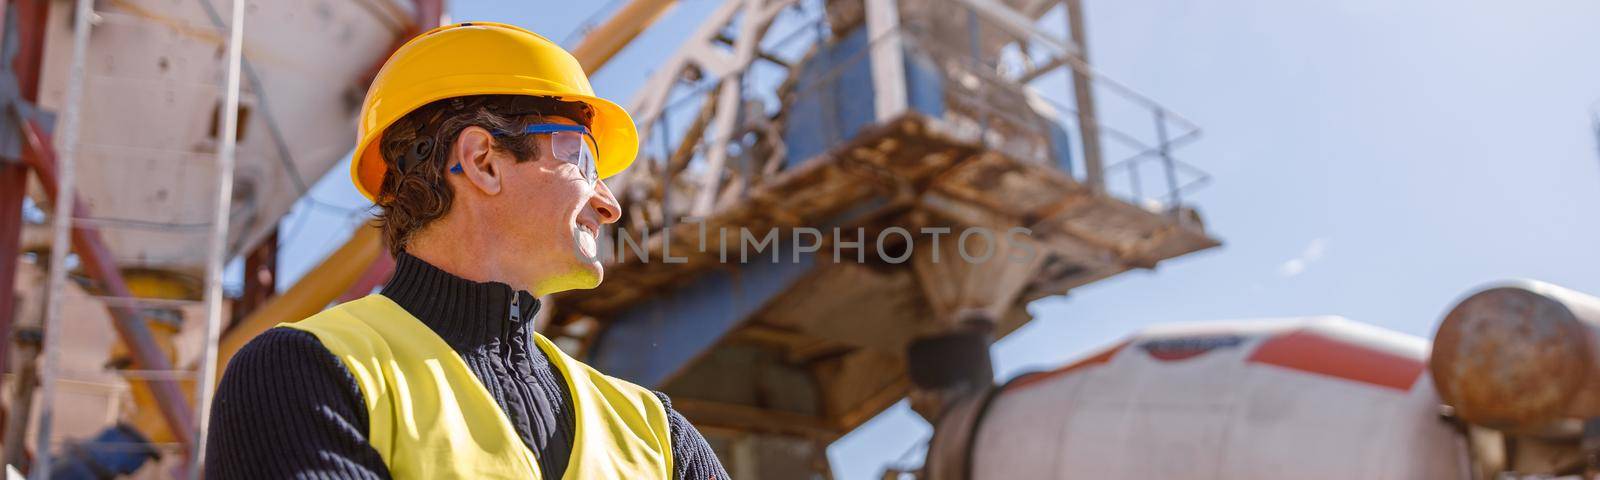 Cheerful matured man wearing work vest and safety helmet while keeping arms crossed and looking at factory machine